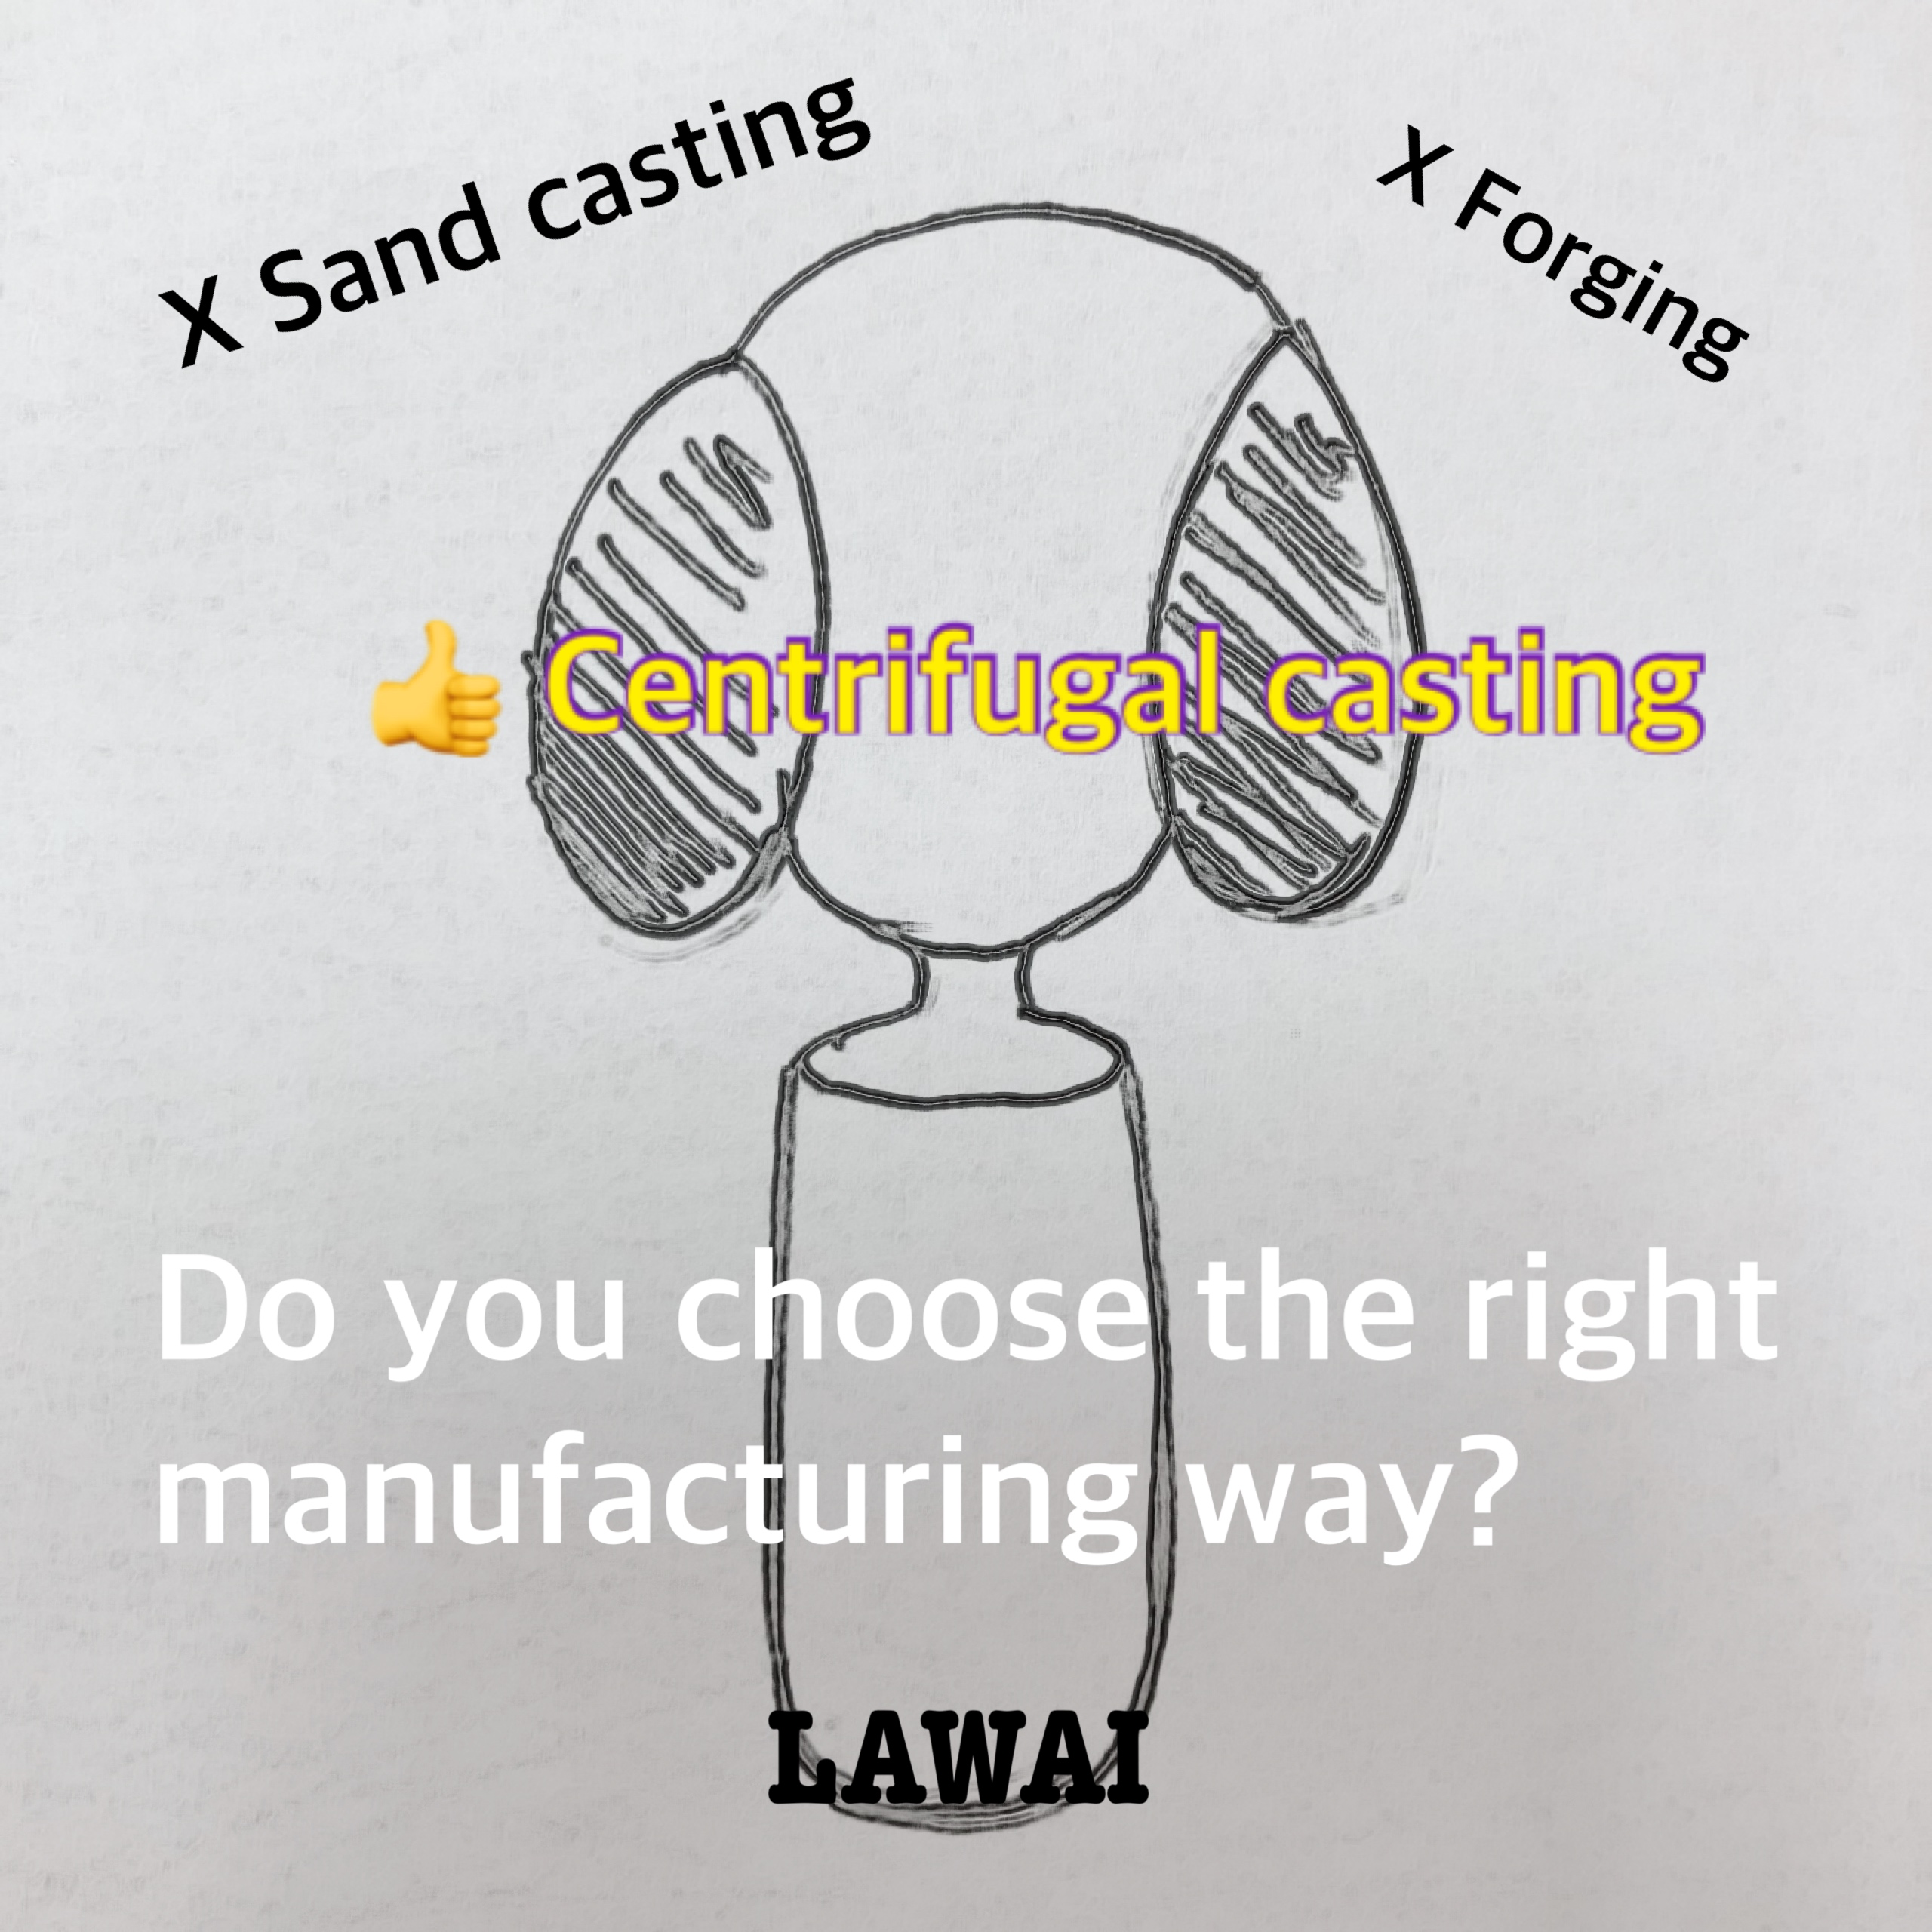 Centrifugal casting is better than sand casting and is almost equal to forging